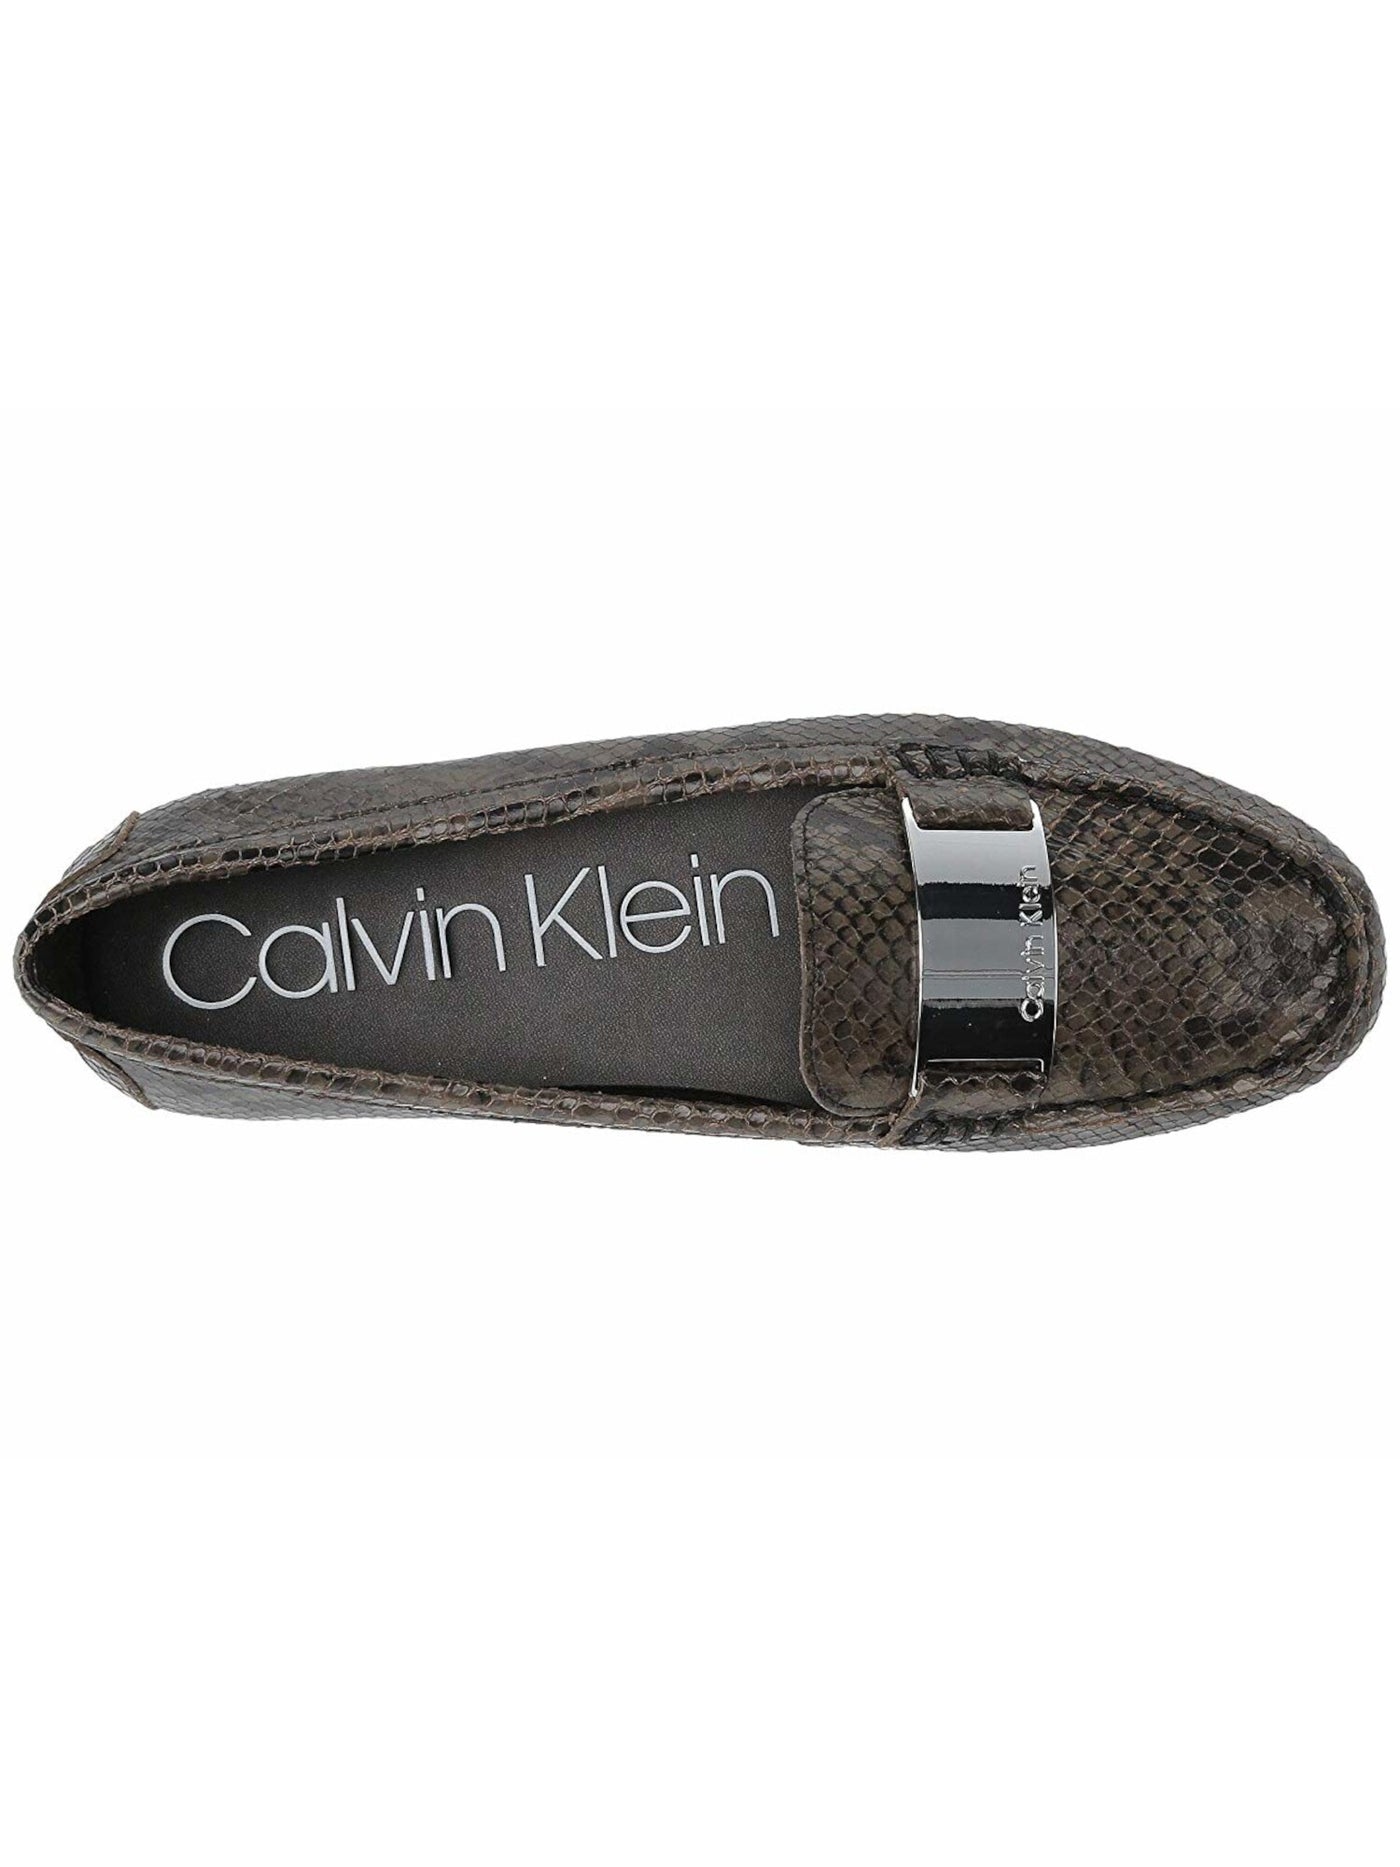 CALVIN KLEIN Womens Brown Camouflage Snakeskin Logo Hardware Cushioned Lisette Round Toe Slip On Leather Loafers Shoes M